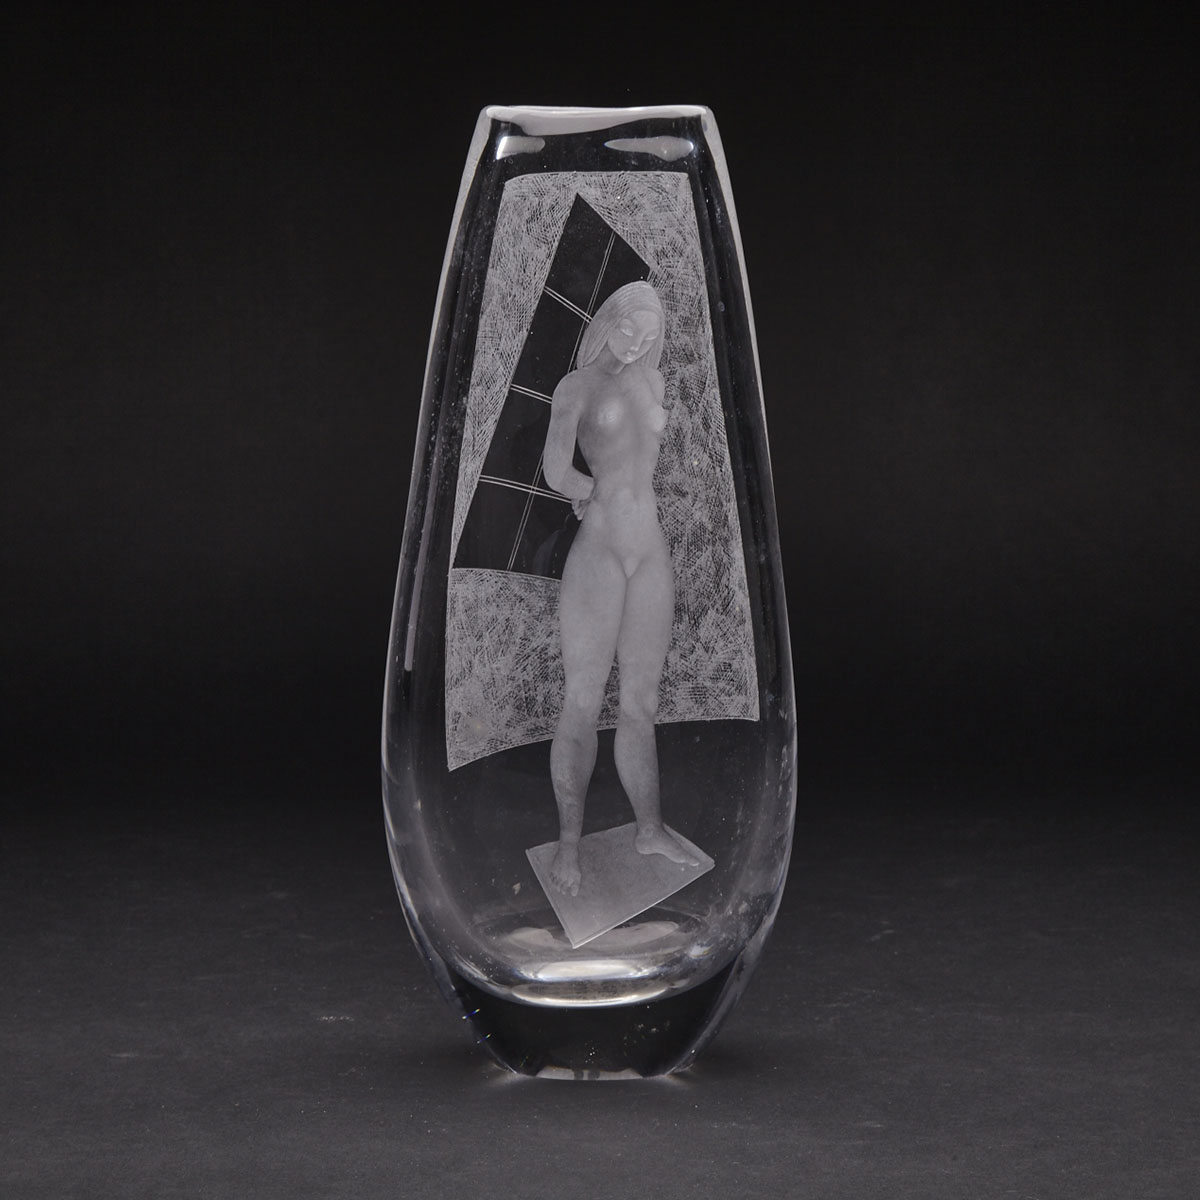 Kosta Female Nude at Window Engraved Glass Vase, Vicke Lindstrand 20th century